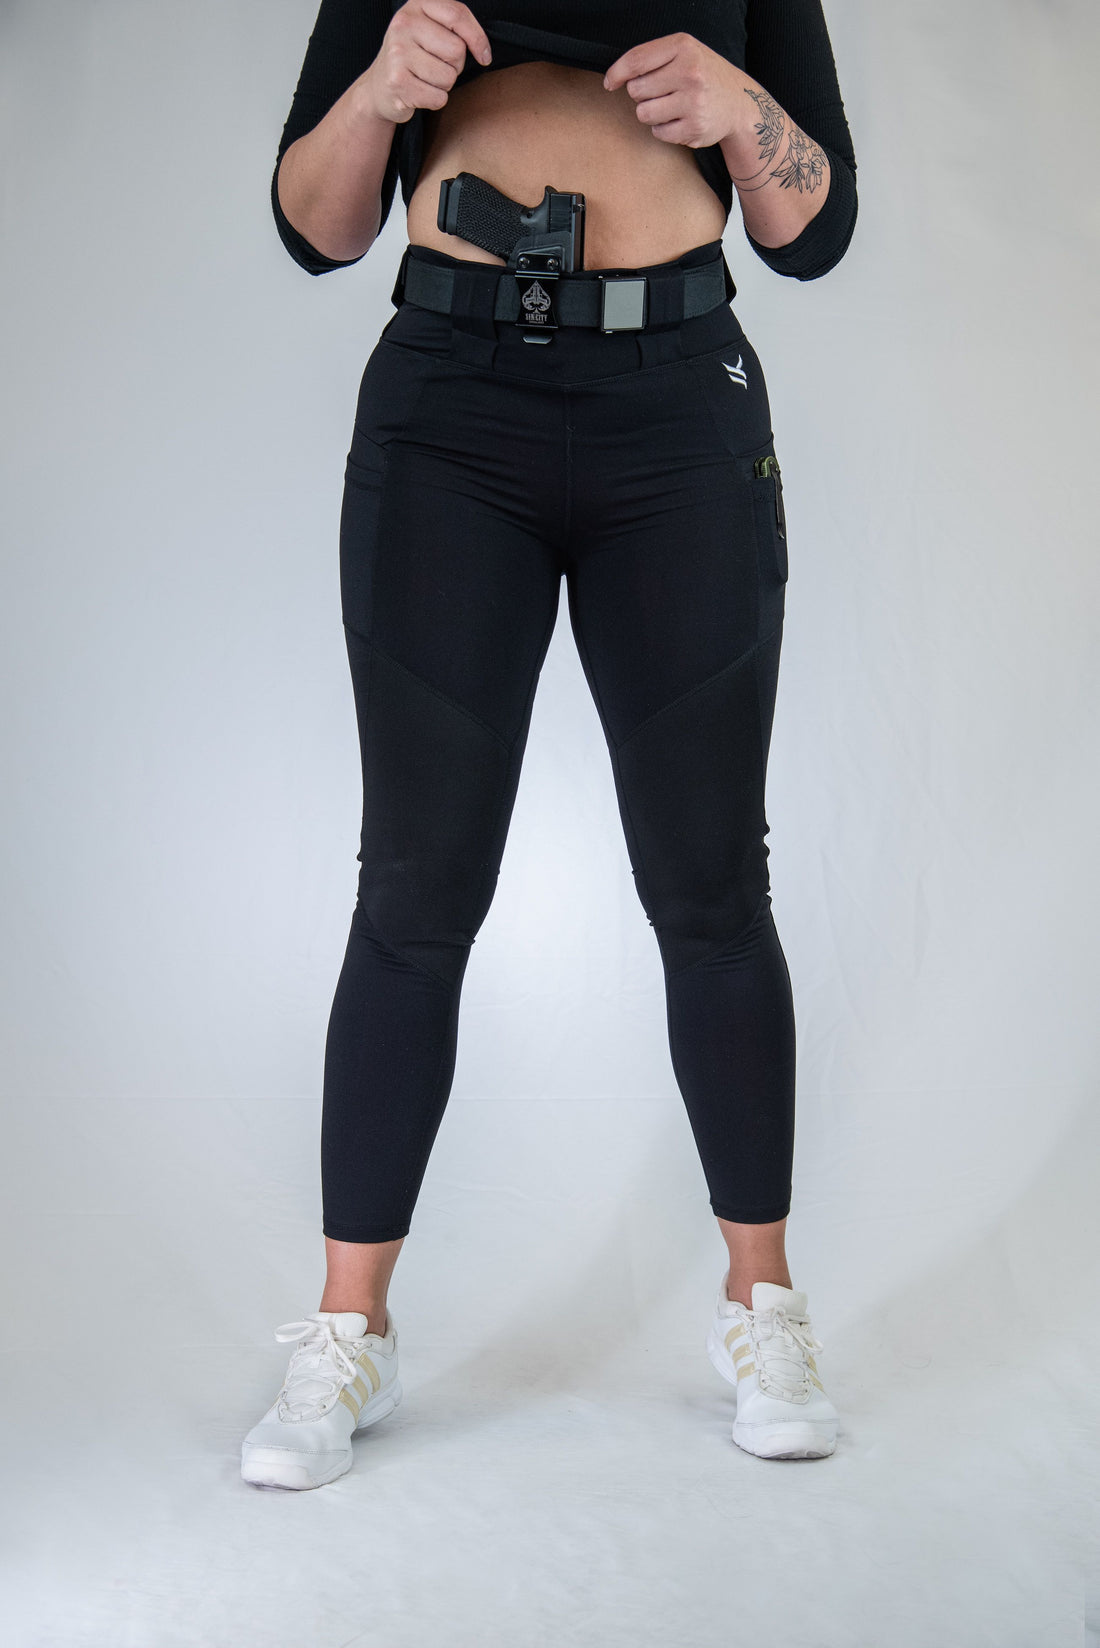 Women's Concealed Carry Leggings: Are They Worth It? - Woman Elan Vital, Davao Lifestyle Blog